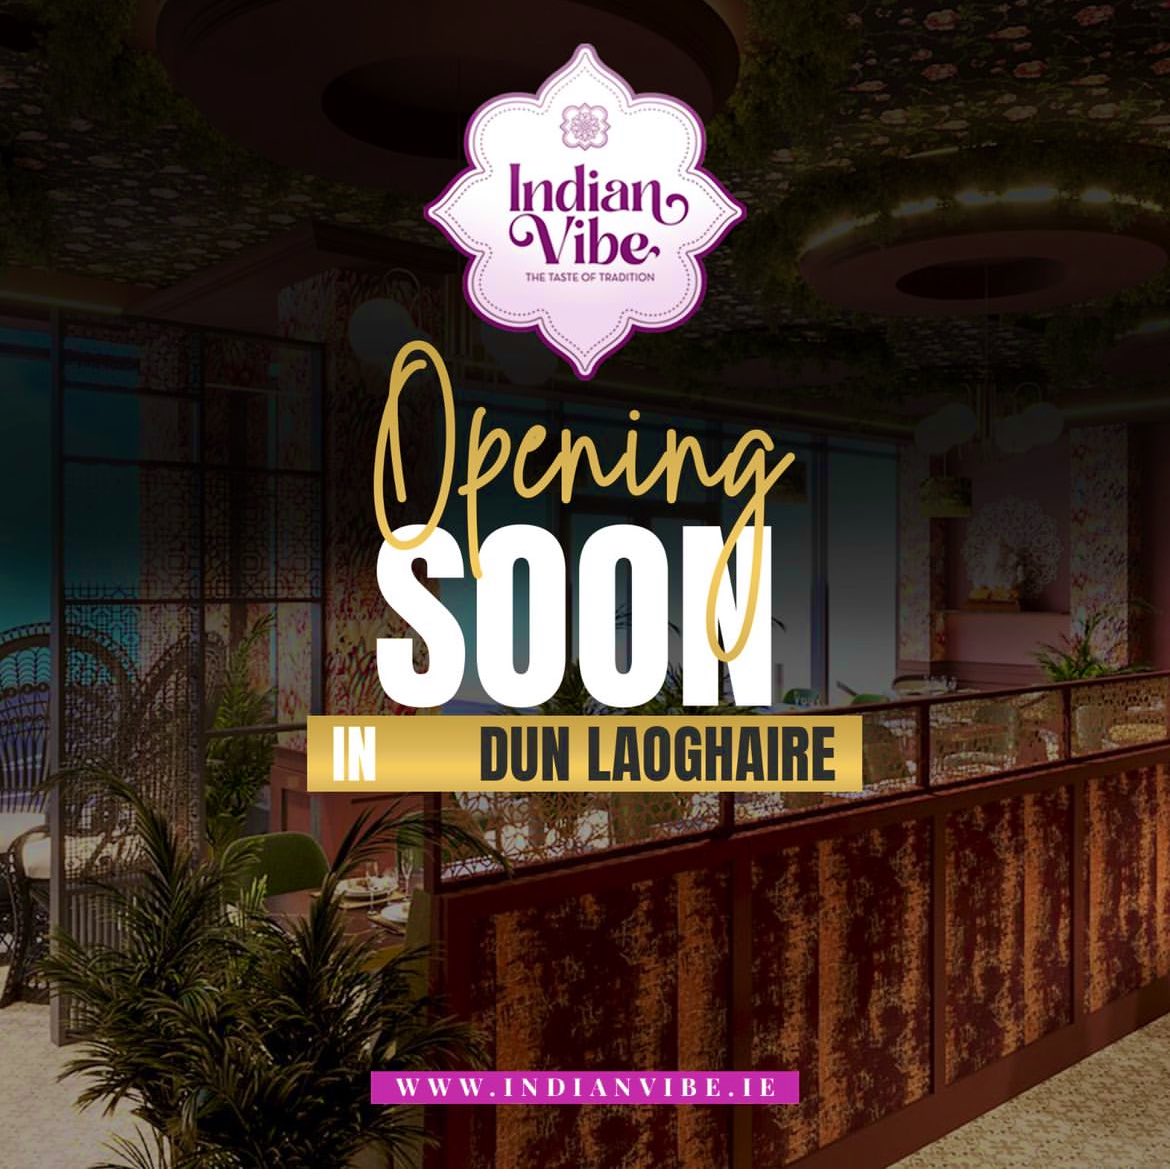 *new opening*
Indian Vibe who have a lovely restaurant in Navan are soon to open in #DunLaoghaire! Best of luck guys for your new restaurant 🙌🏻🙌🏻🇮🇳 #IndianRestaurant